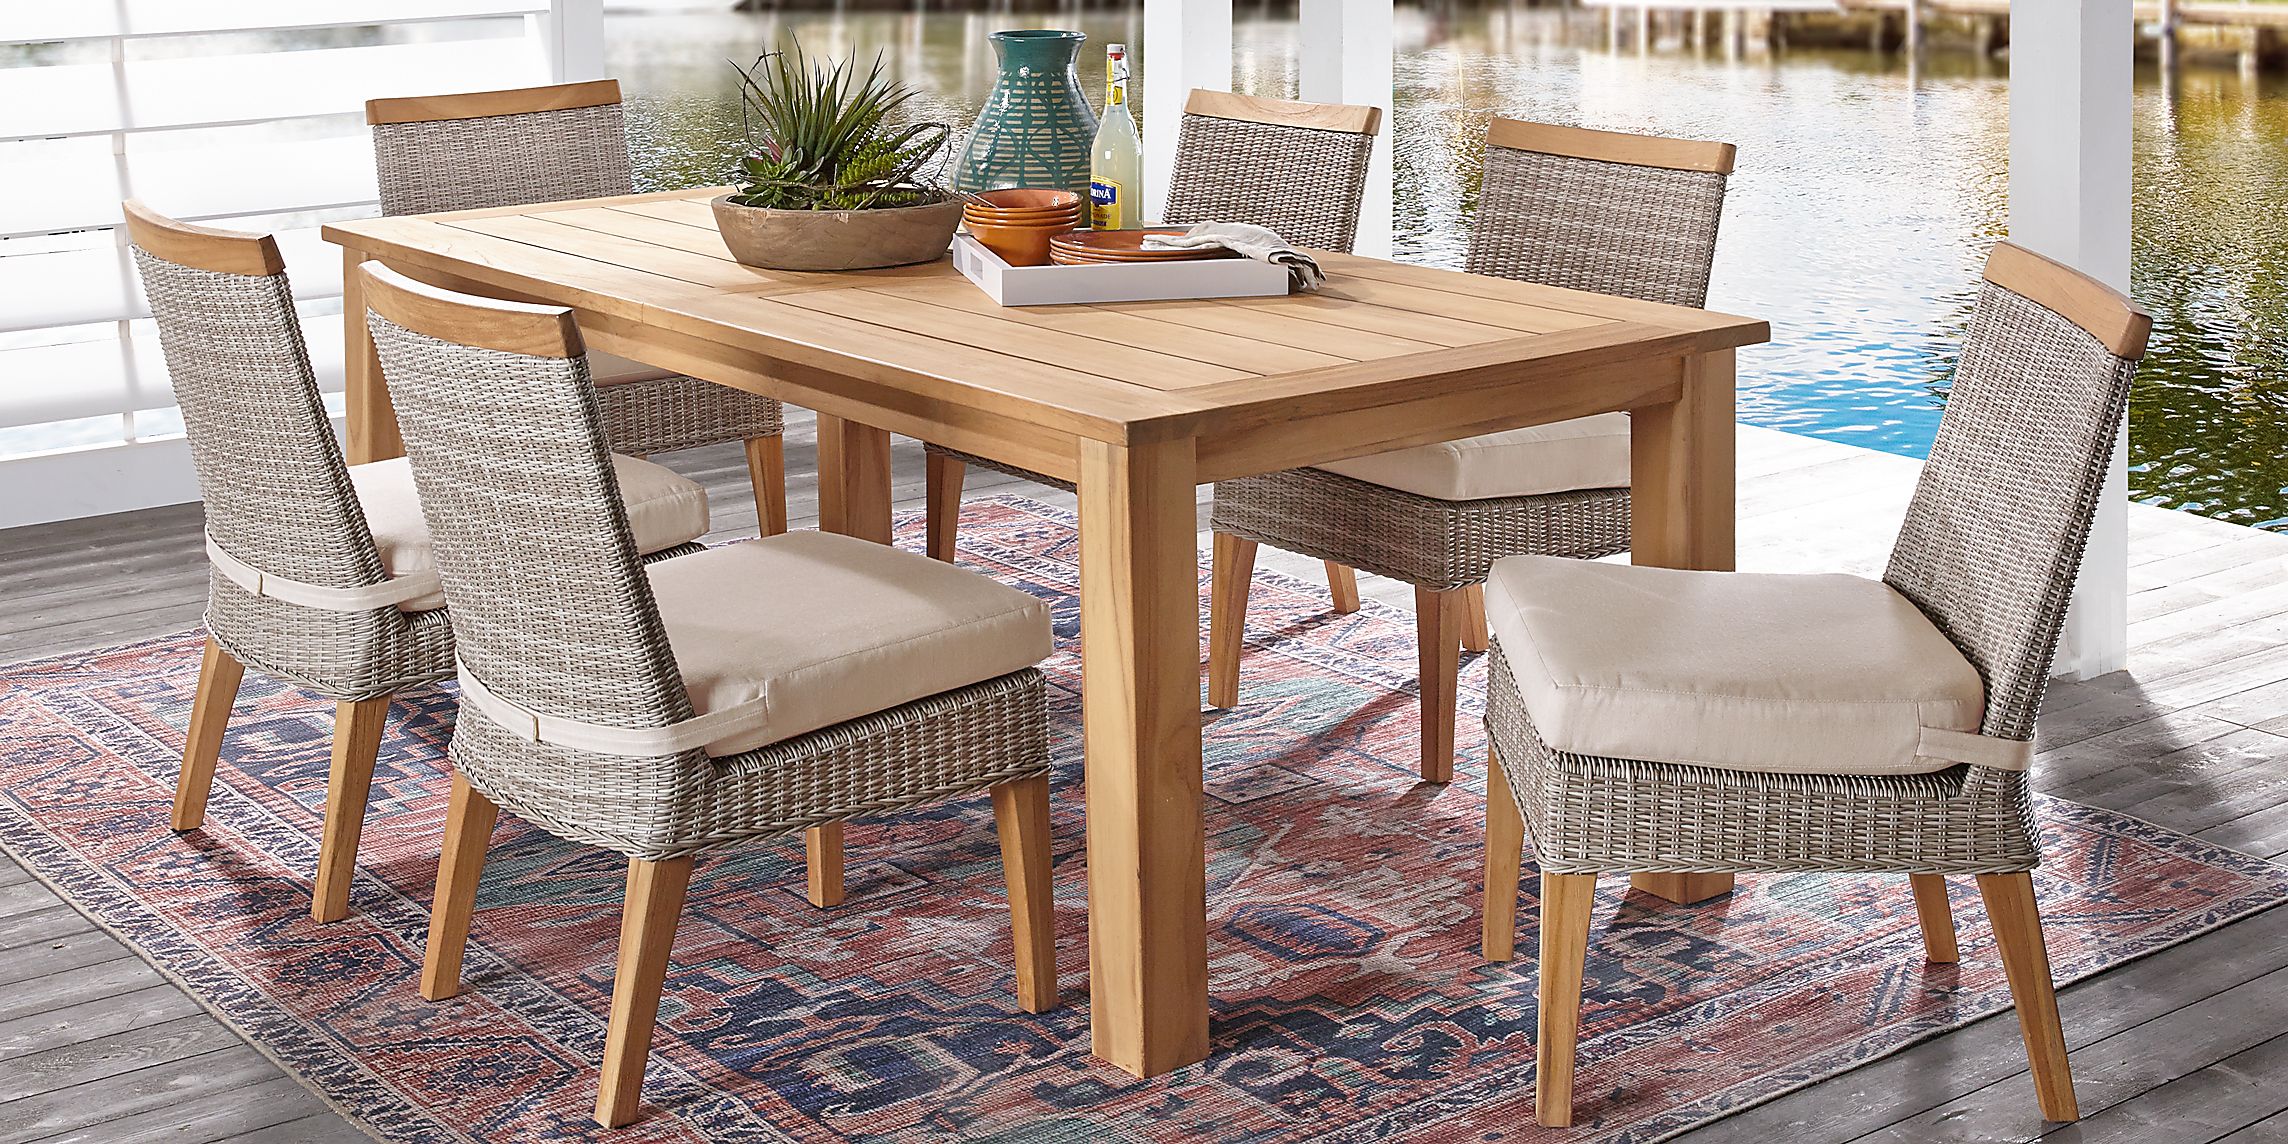 Cindy Crawford Home Hamptons Cove Teak 7 Pc Rectangle Outdoor Dining Set with Flax Cushions